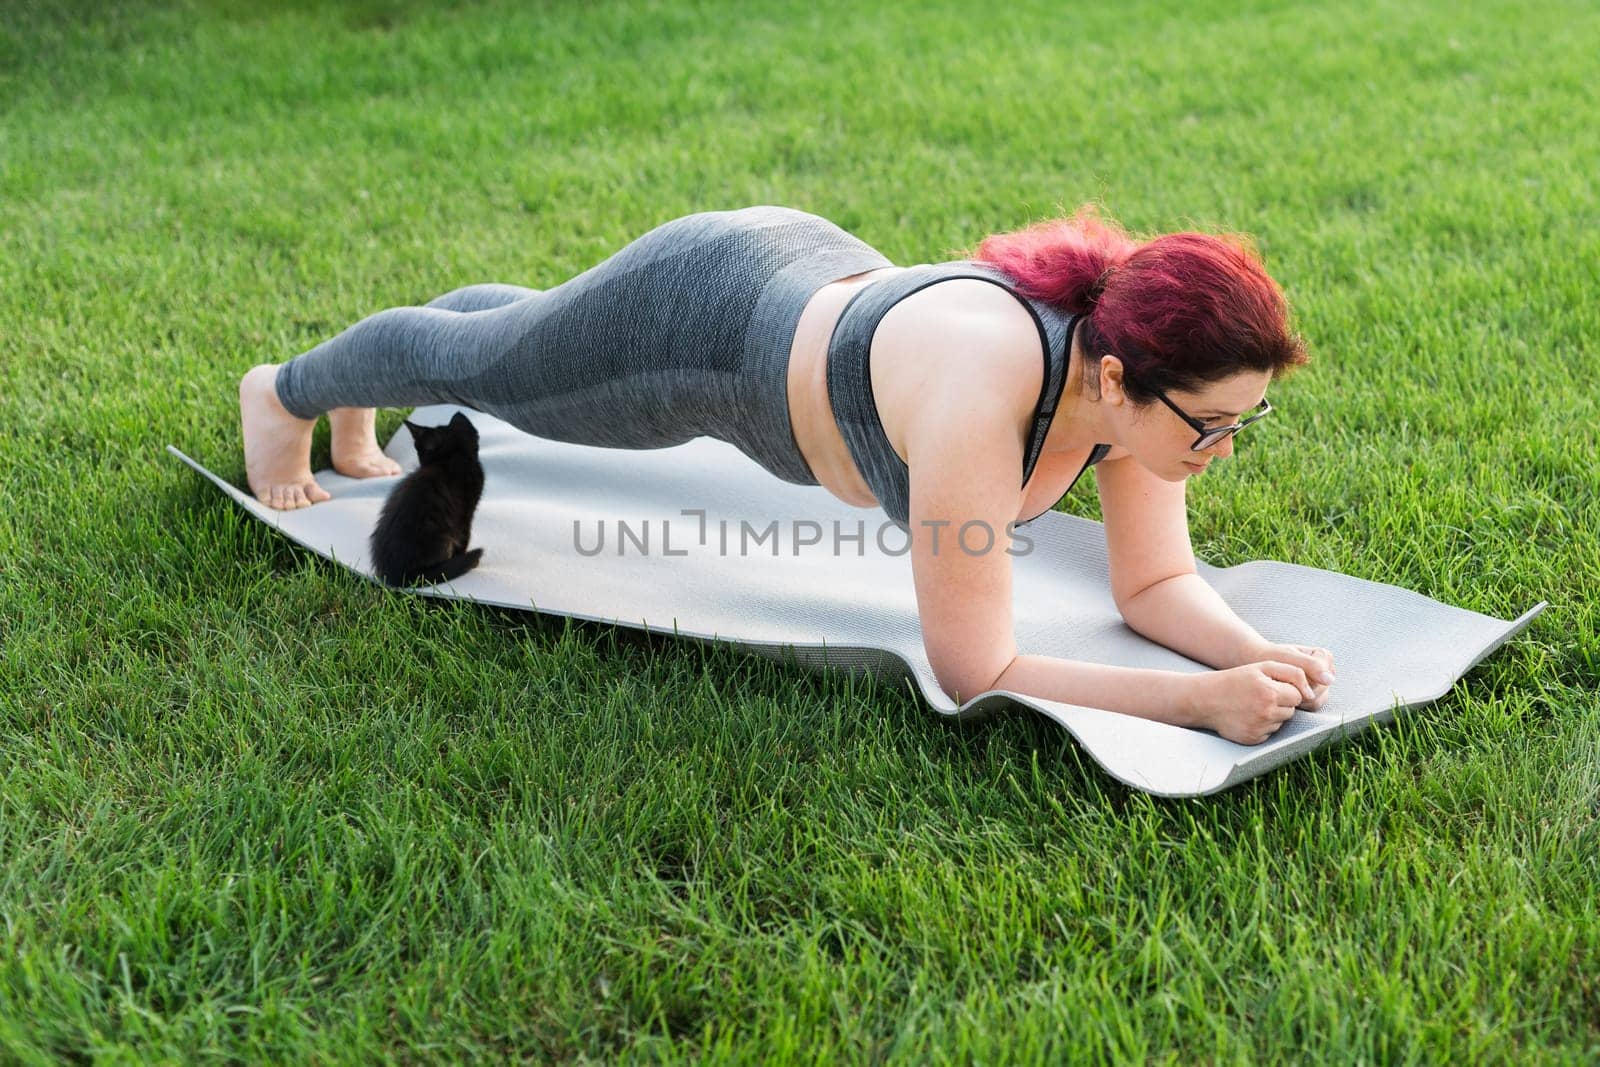 Young plus size woman in sporty top and leggings standing in plank on yoga mat spending time on green grass in yard. Black kitten walks around her. Well being and body positivity fitness concept by Satura86